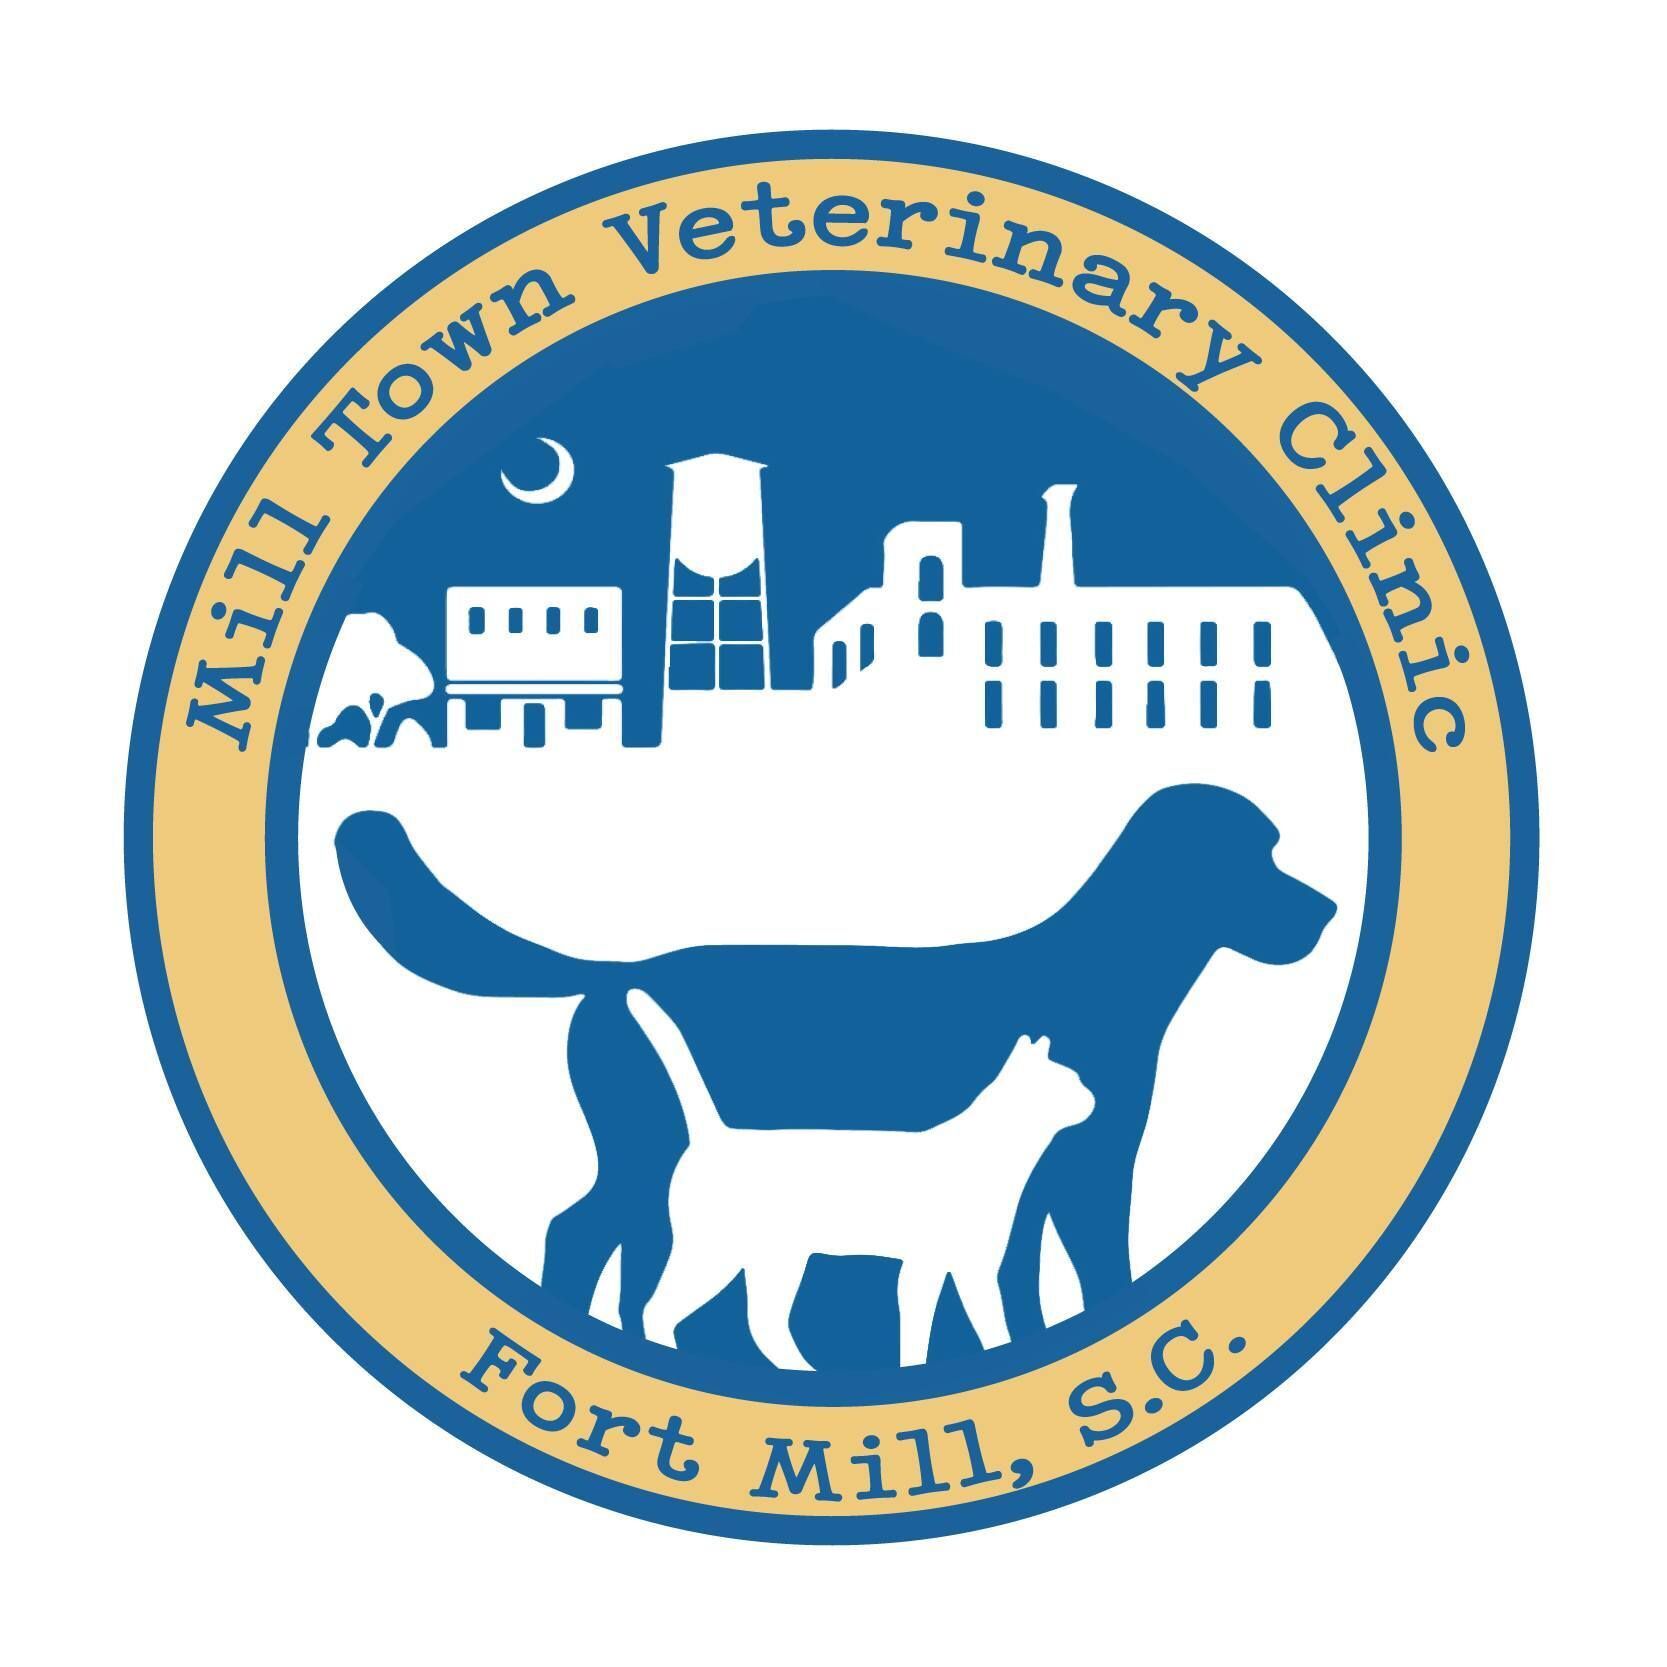 Mill Town Veterinary Clinic